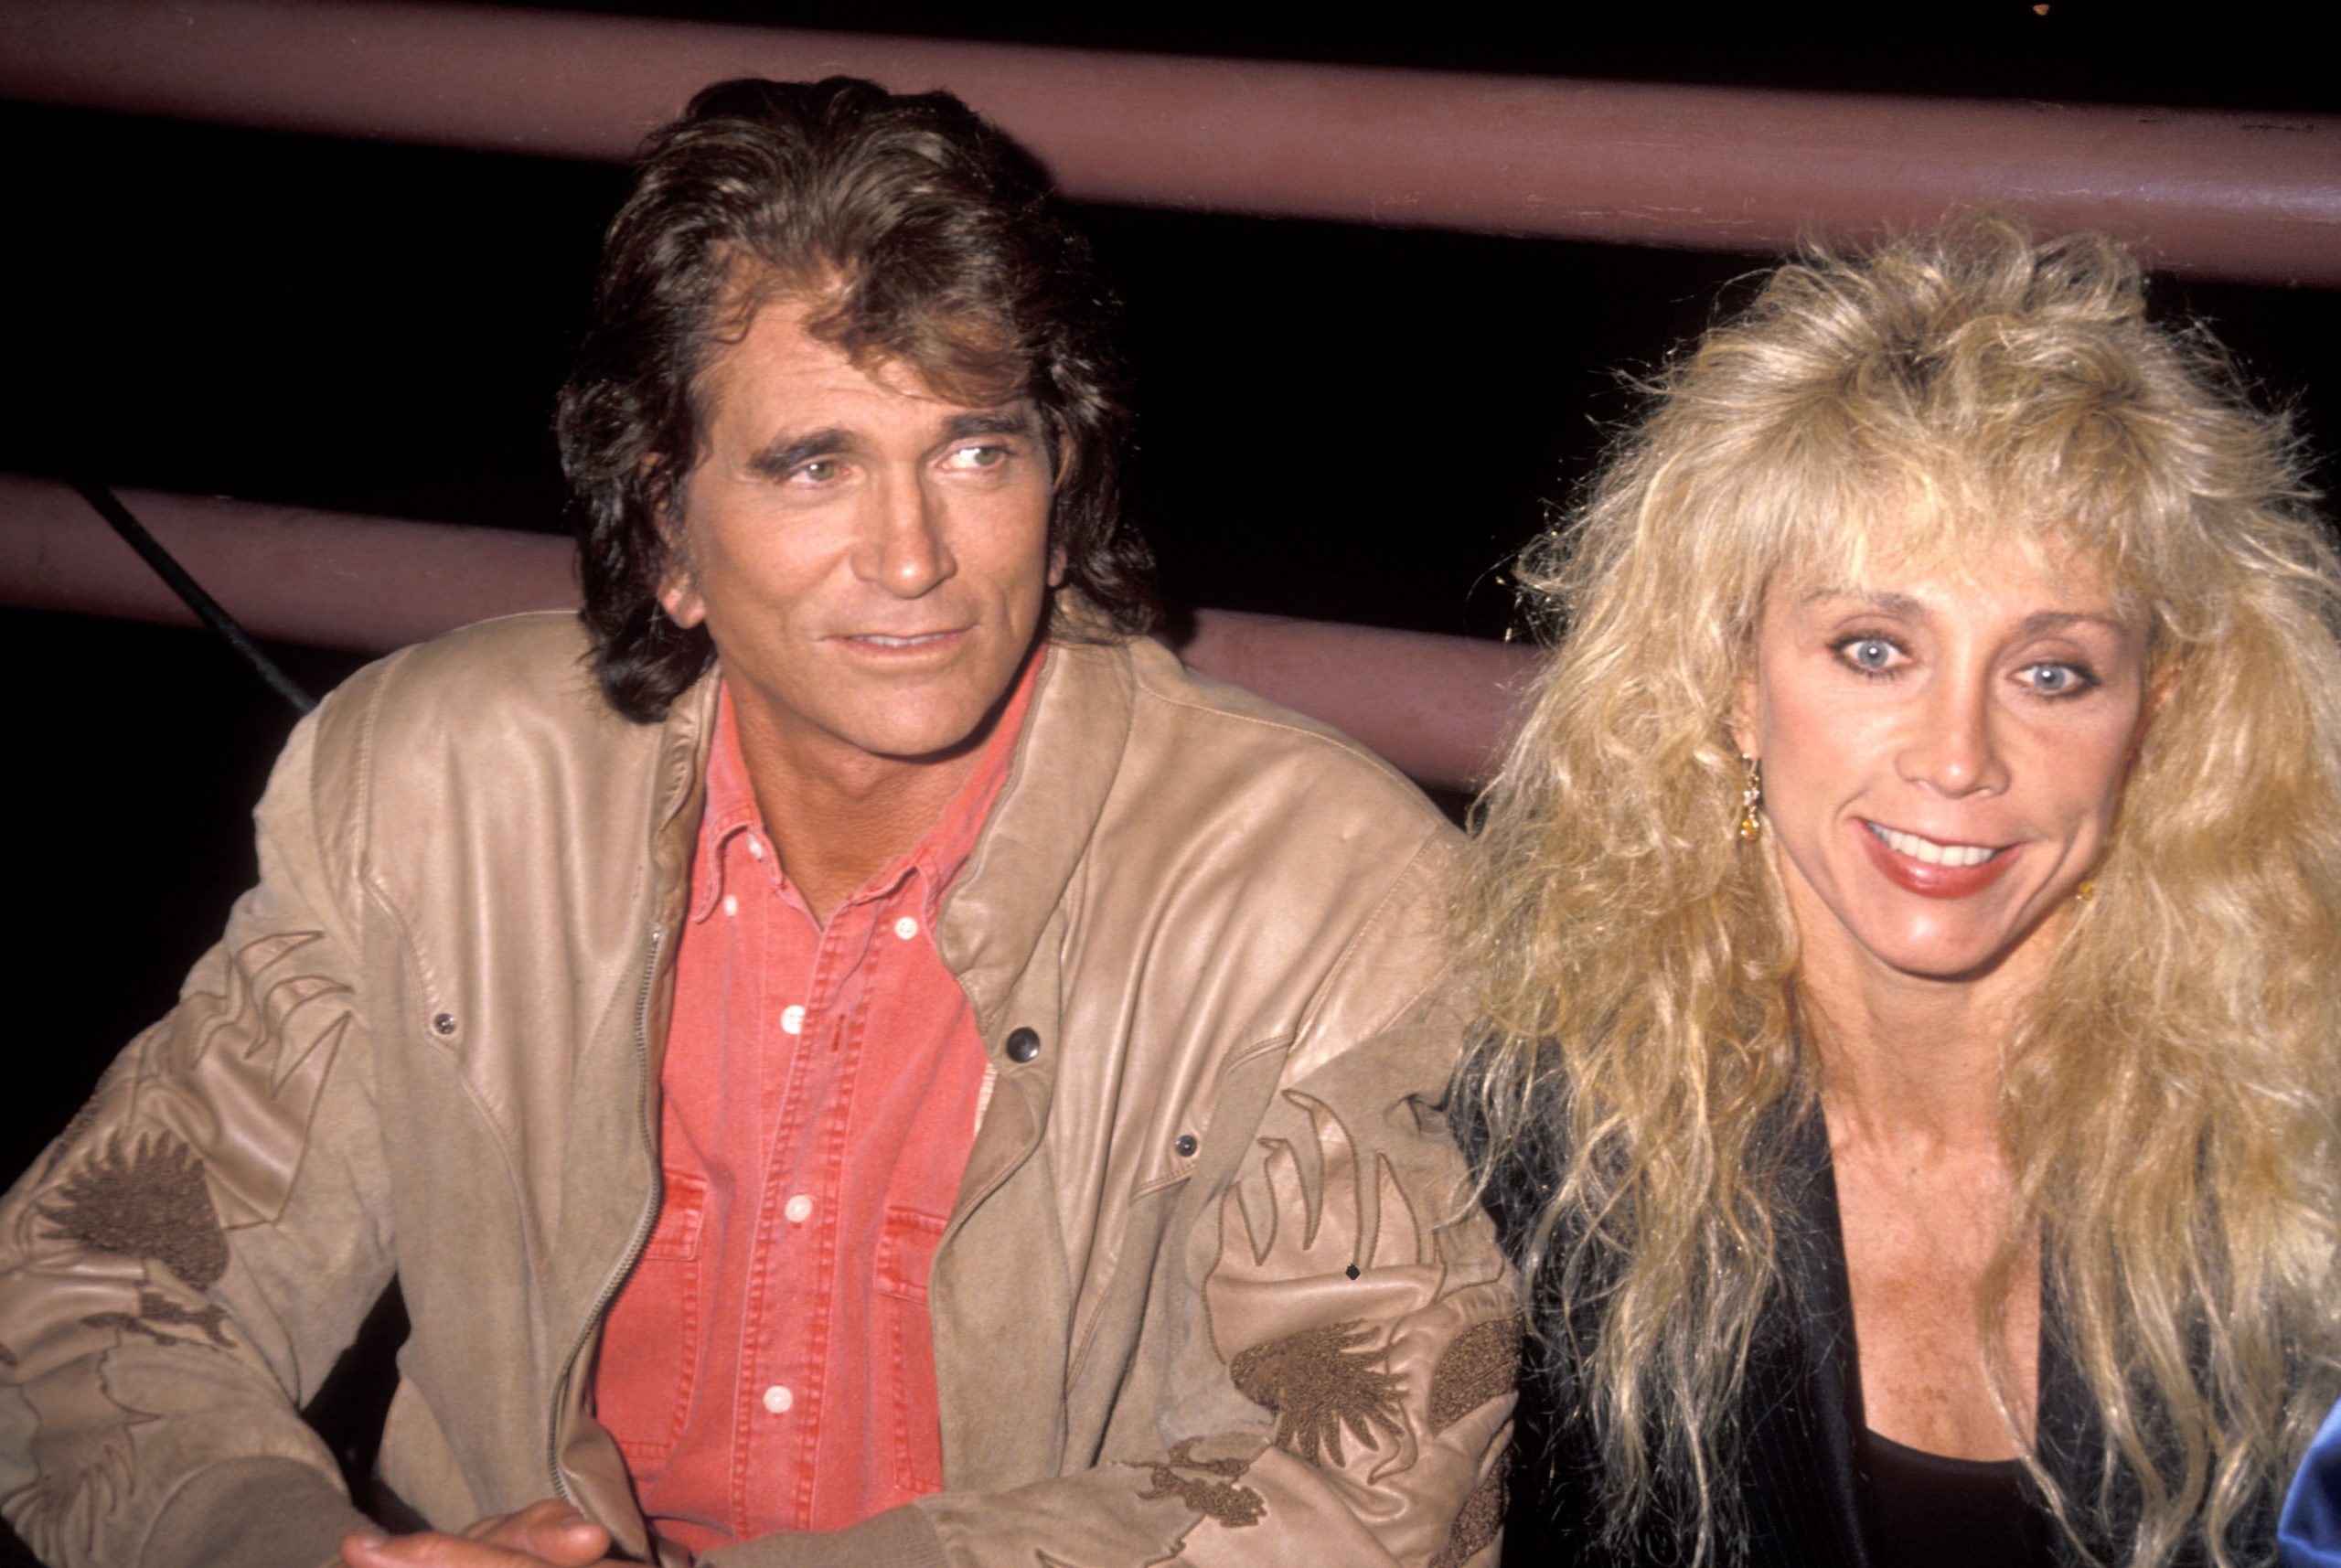 Michael Landon, star of Little House on the Prairie, sits next to wife Cindy Landon